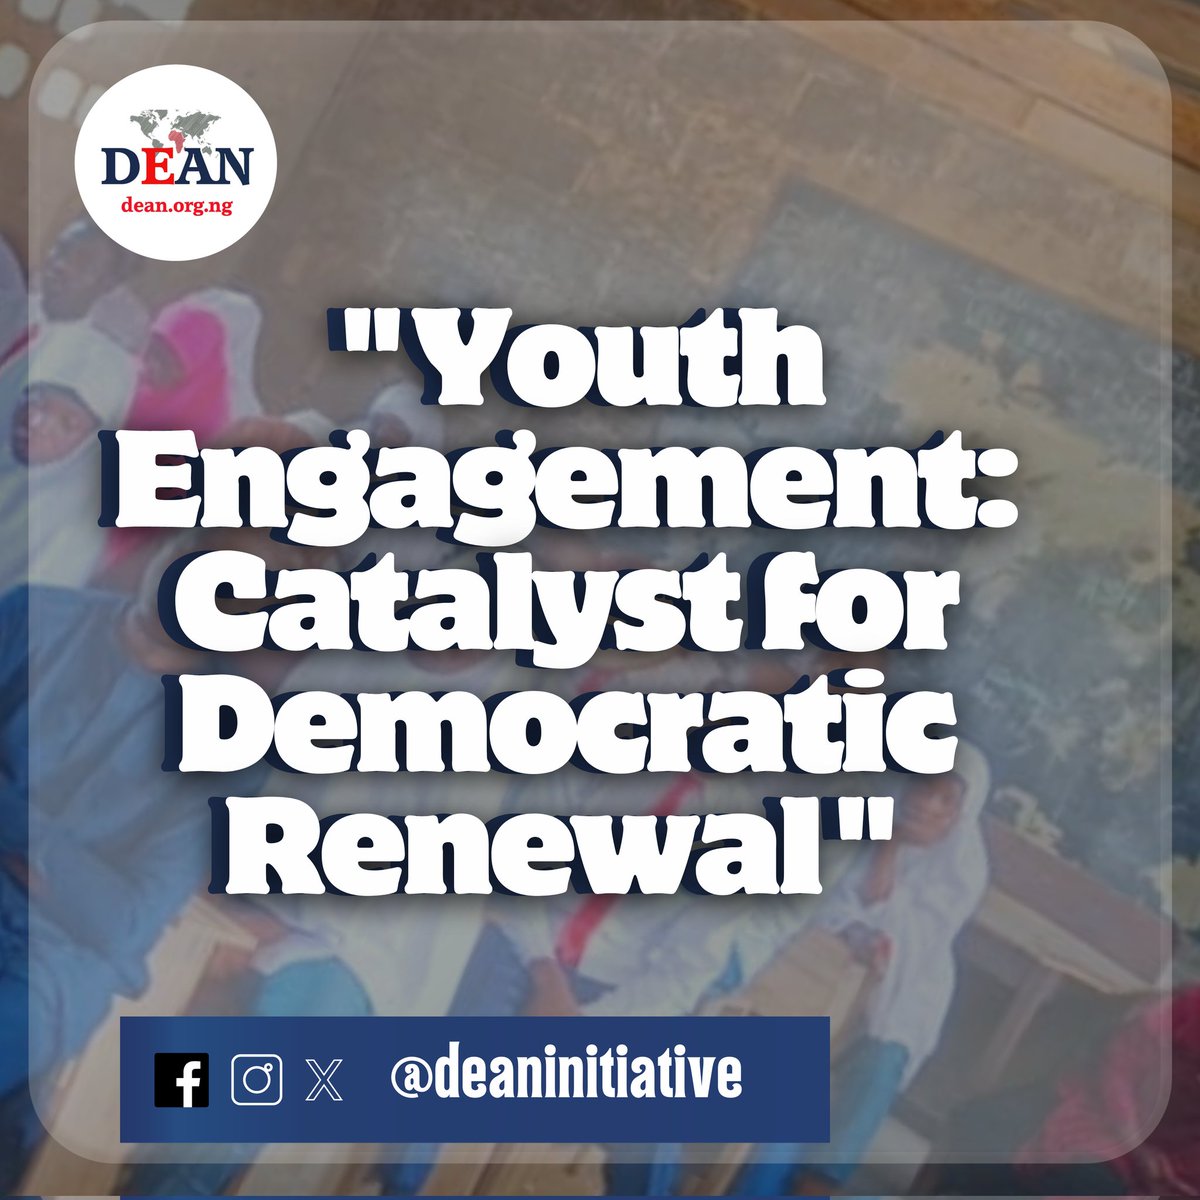 Empowering youths with civic tools fosters responsibility and fresh perspectives. Despite challenges like voter suppression, efforts are needed to create inclusive spaces. Through education and leadership initiatives, youths become effective agents of change, for a better future.